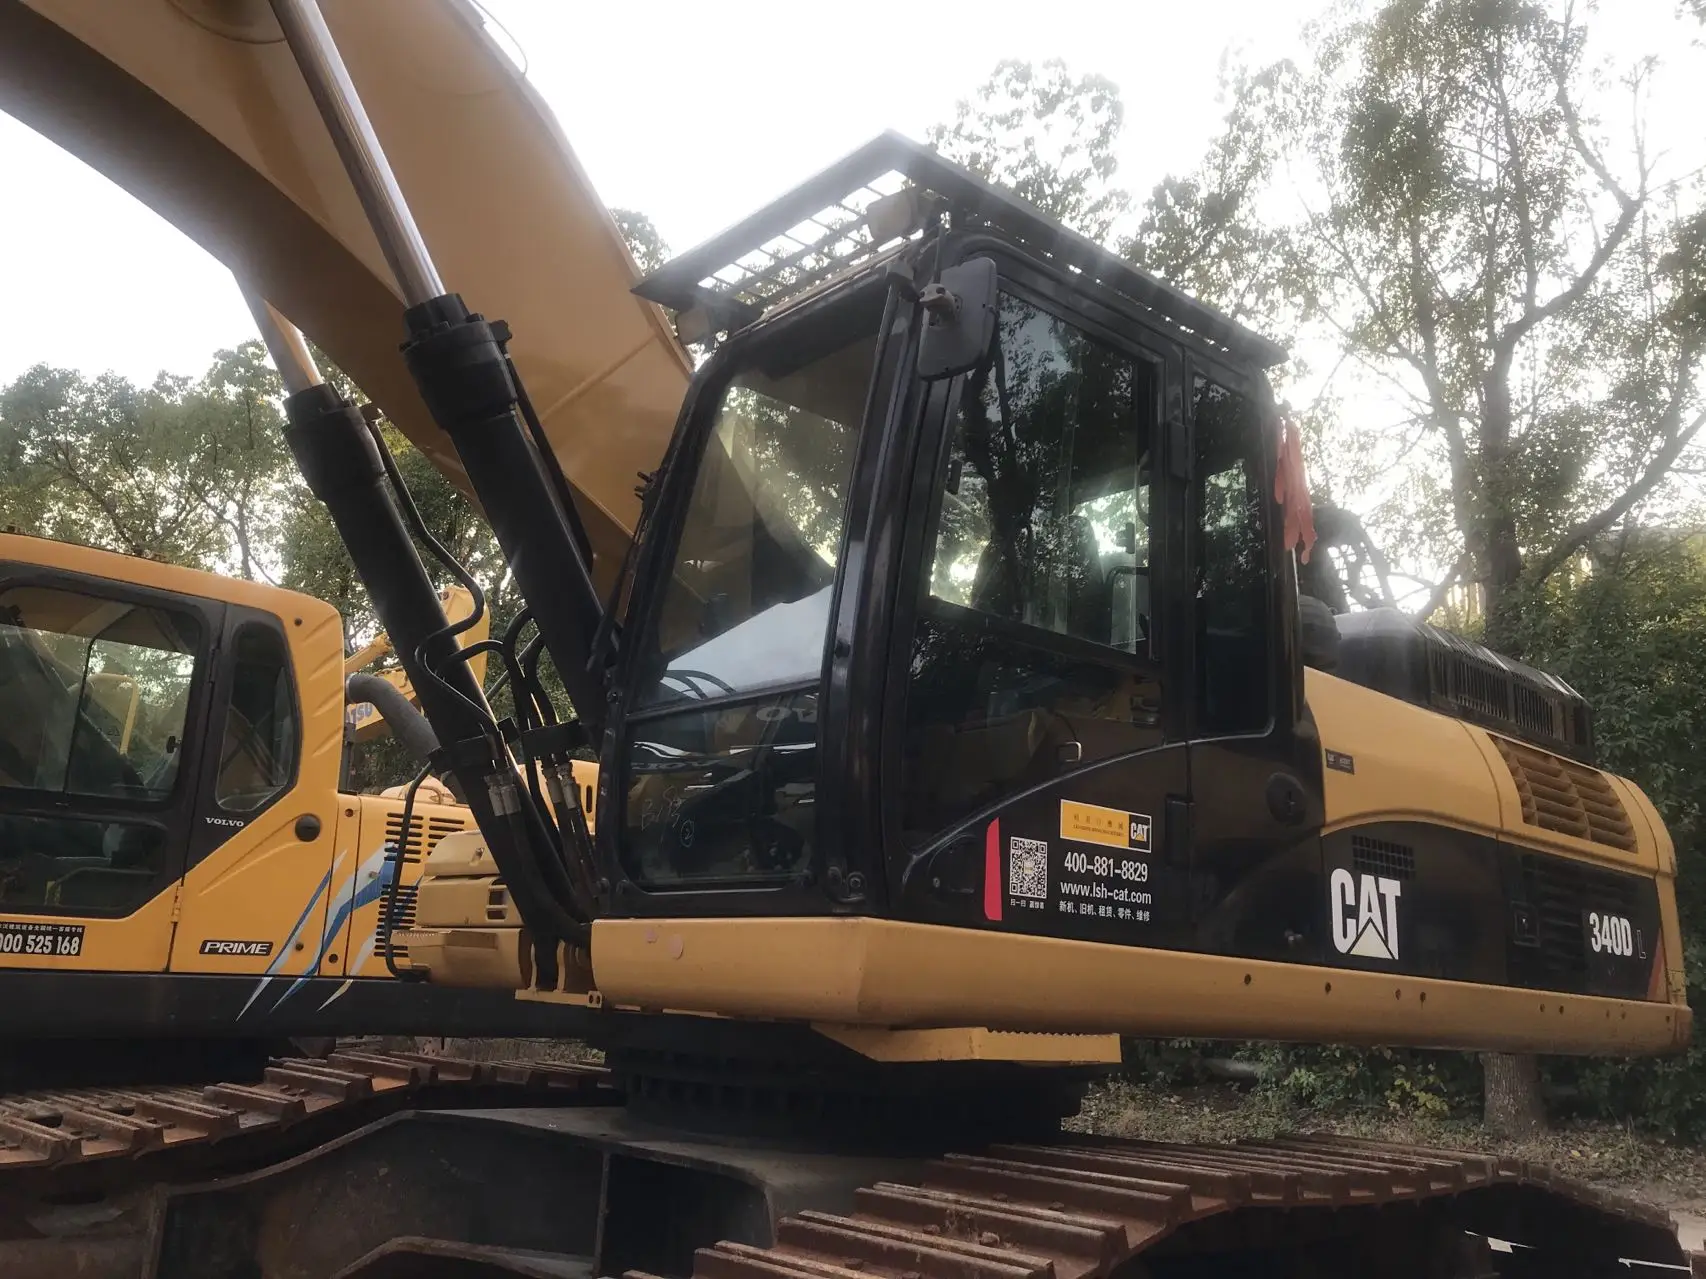 Used crawler excavator caterpillarr340 cheaper for sale in good condition with high quality